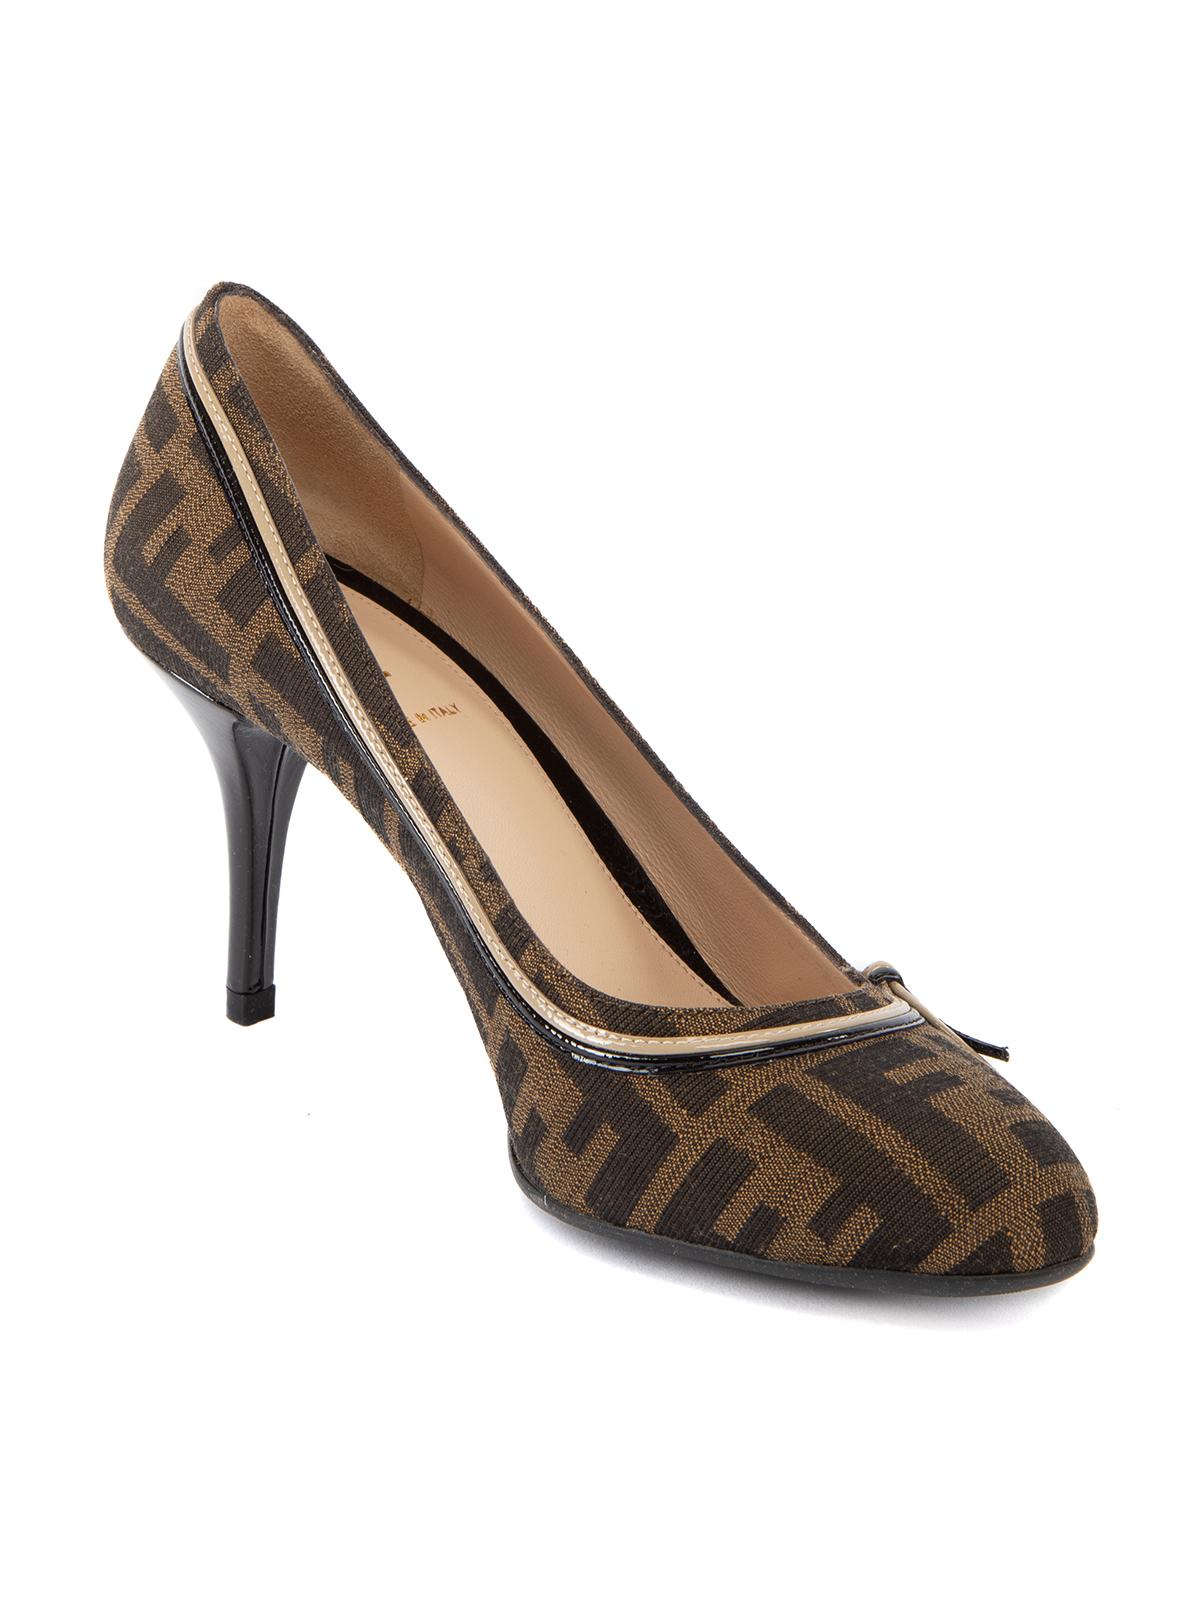 CONDITION is Never Worn. No visible wear to heels is evident on this used Fendi designer resale item. Details Black, brown Court shoe Mid heel Patent leather piping Comes with box Made in Italy Composition Cloth, leather Size & Fit Heel Height